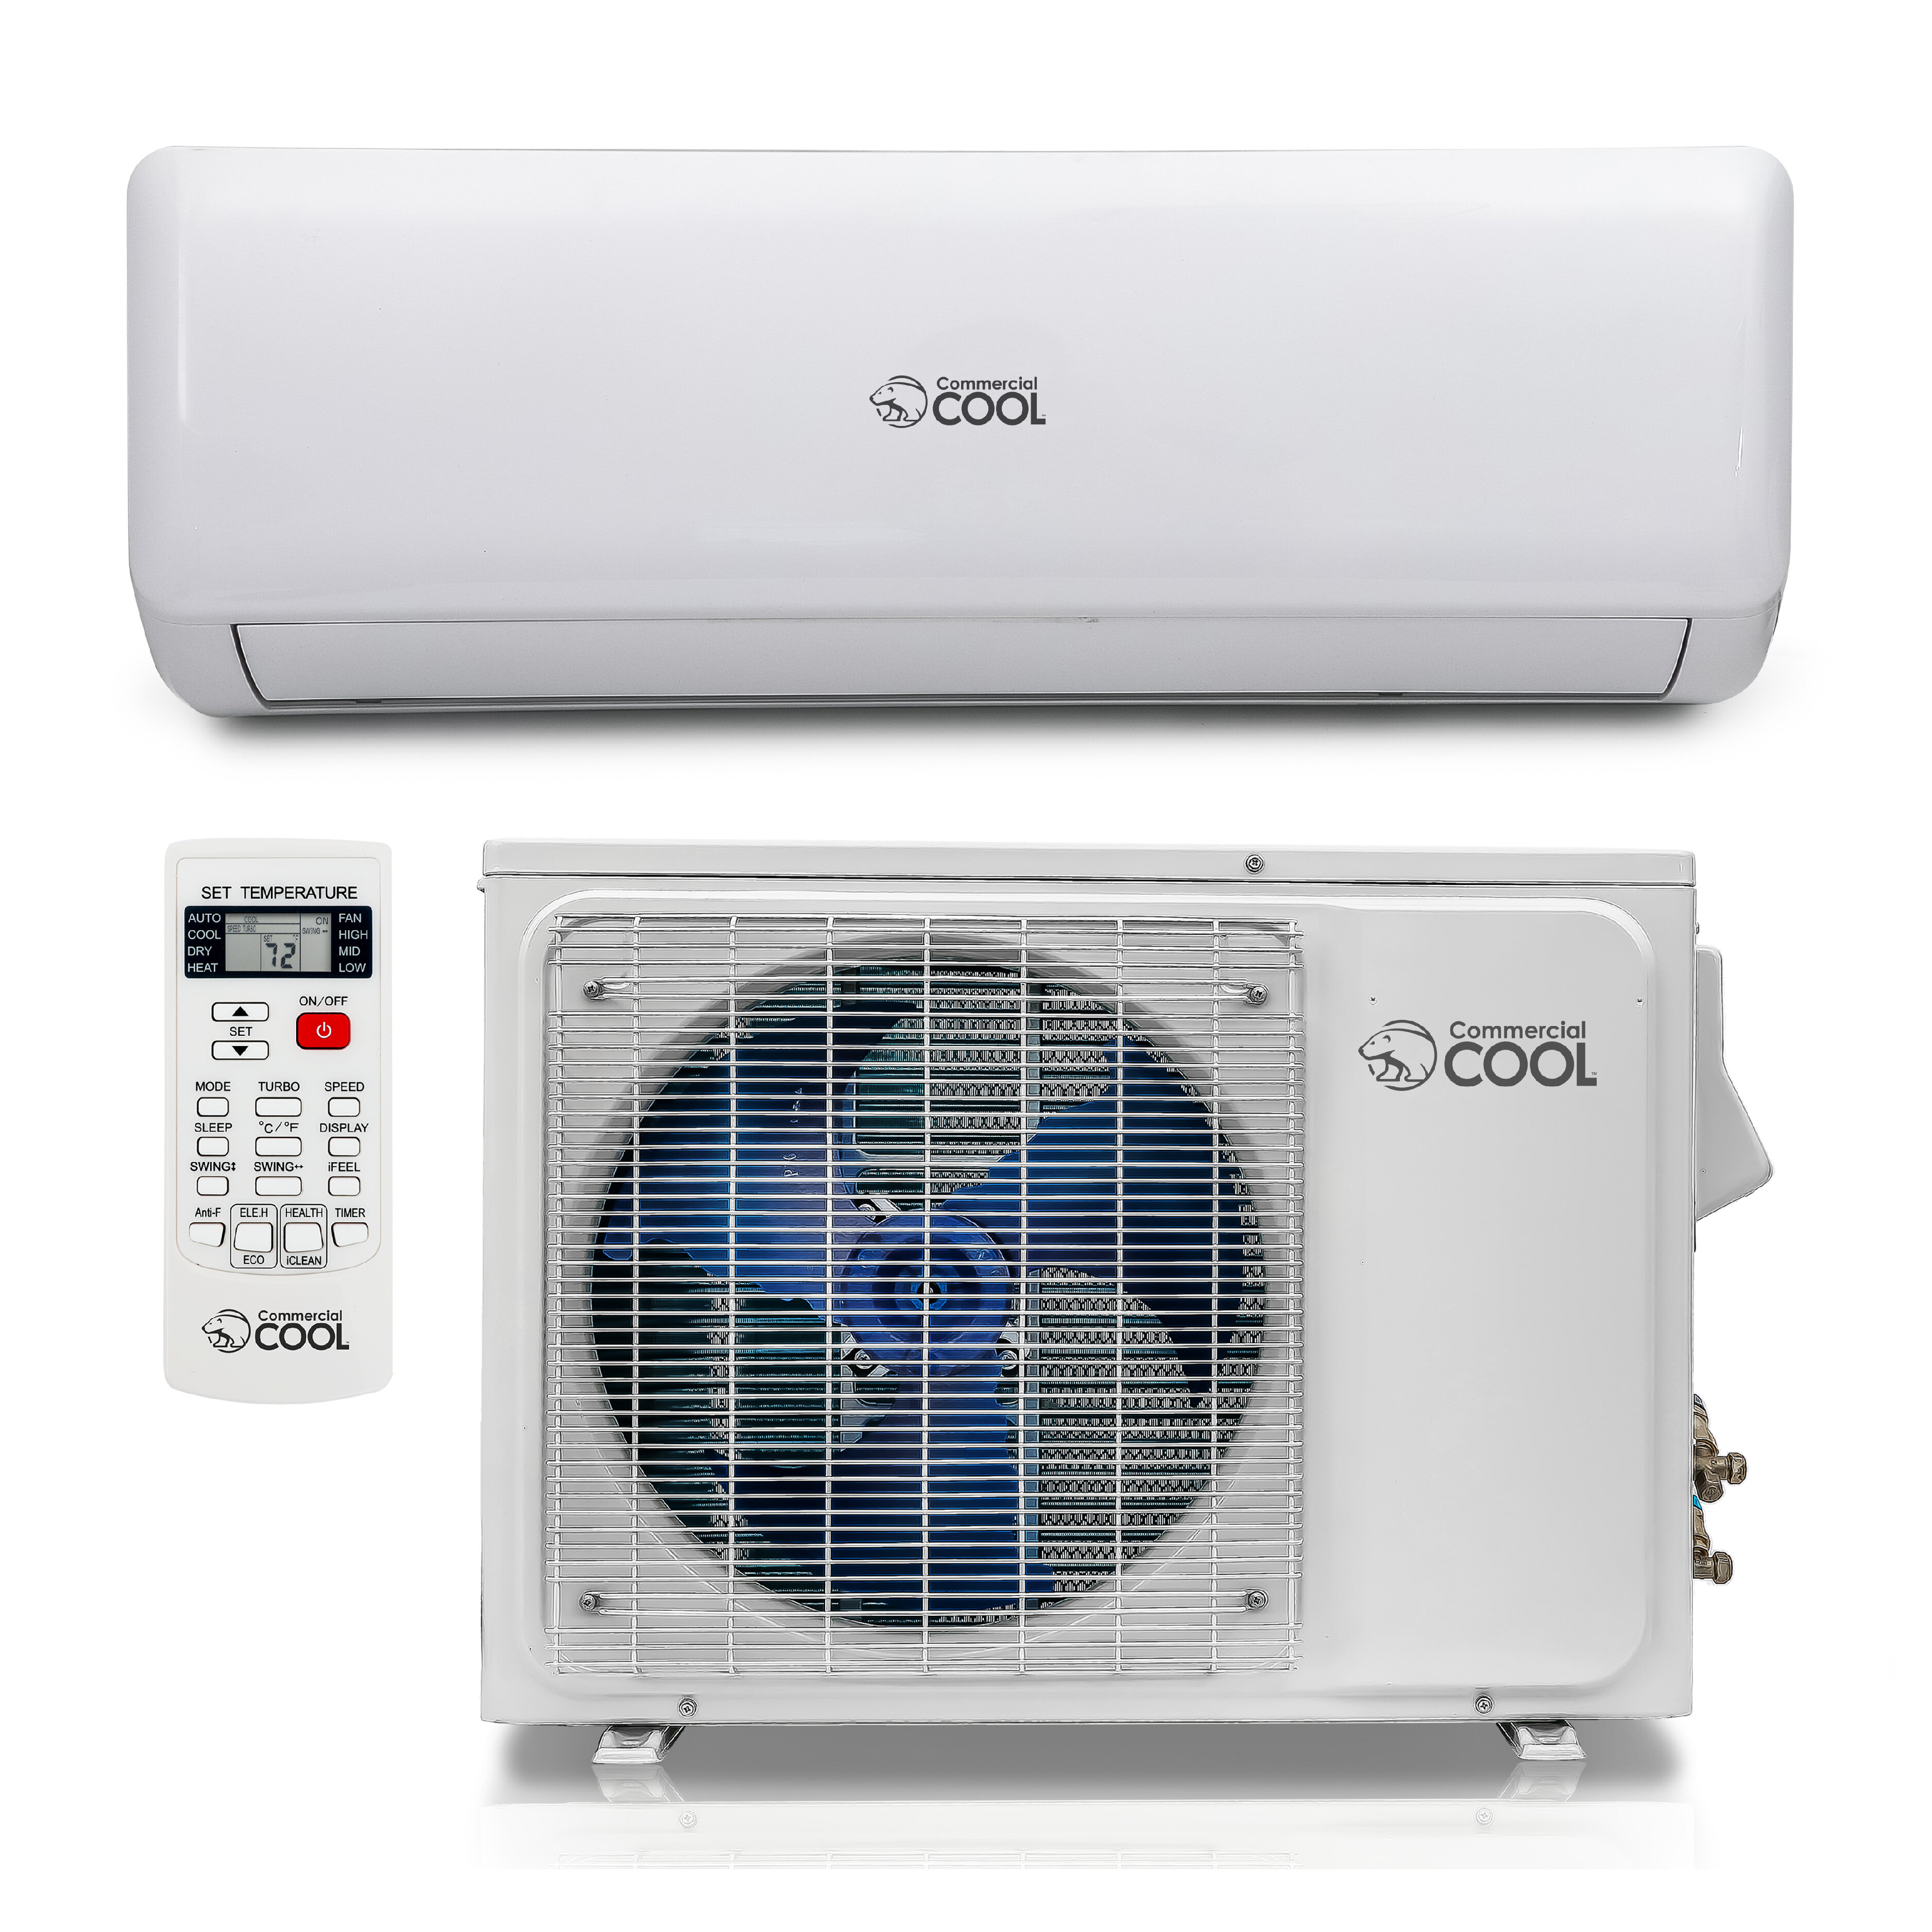 Cool Comfort, TV & Home Appliances, Air Conditioners & Heating on Carousell